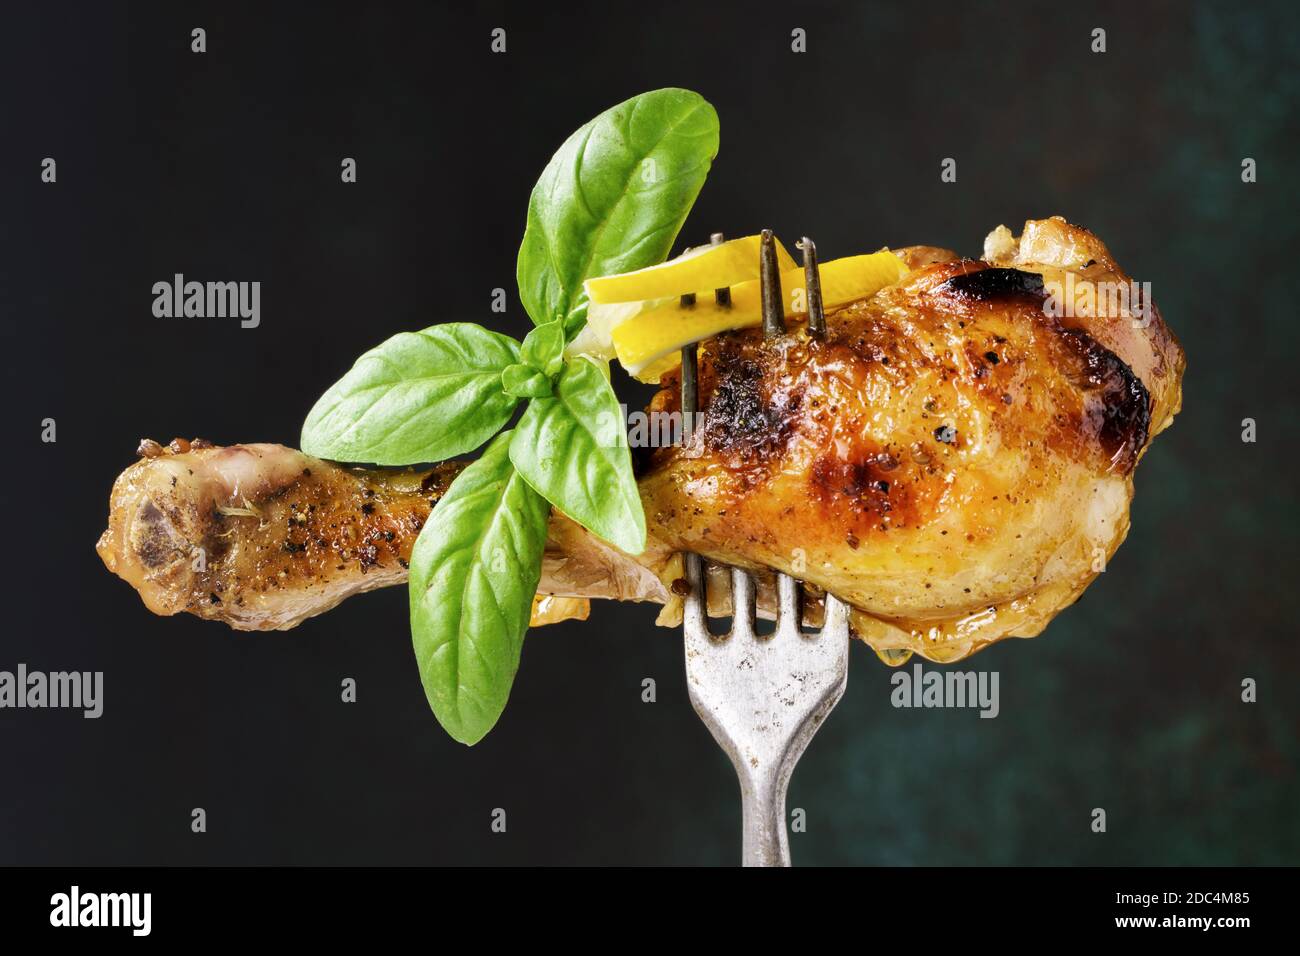 Hot and spicy chicken drumstick Stock Photo